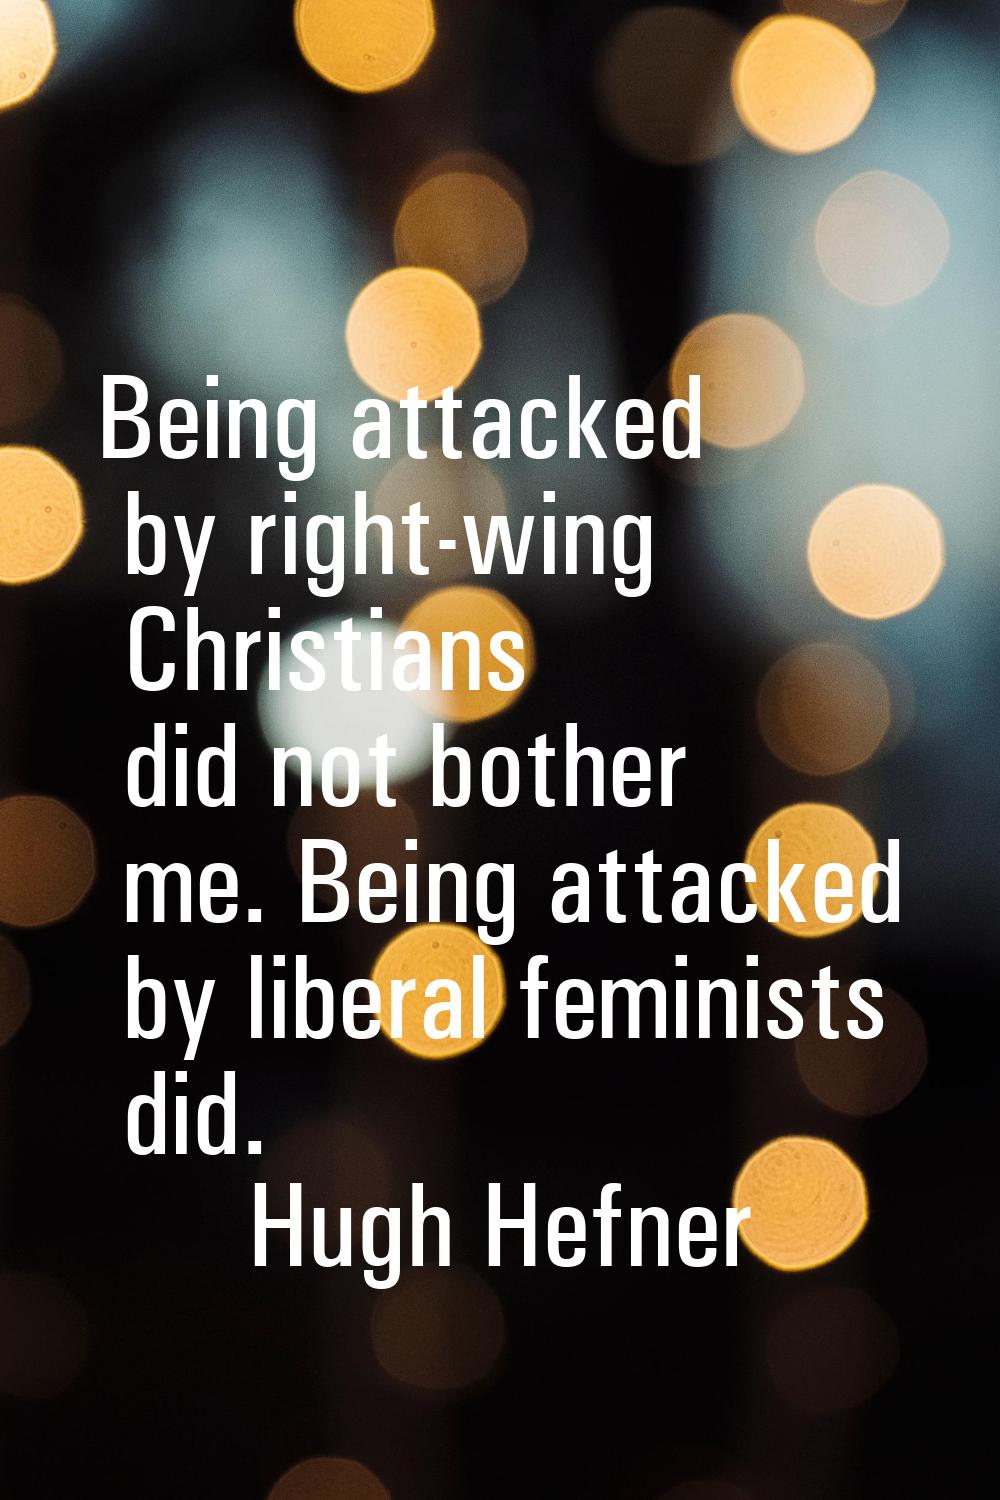 Being attacked by right-wing Christians did not bother me. Being attacked by liberal feminists did.